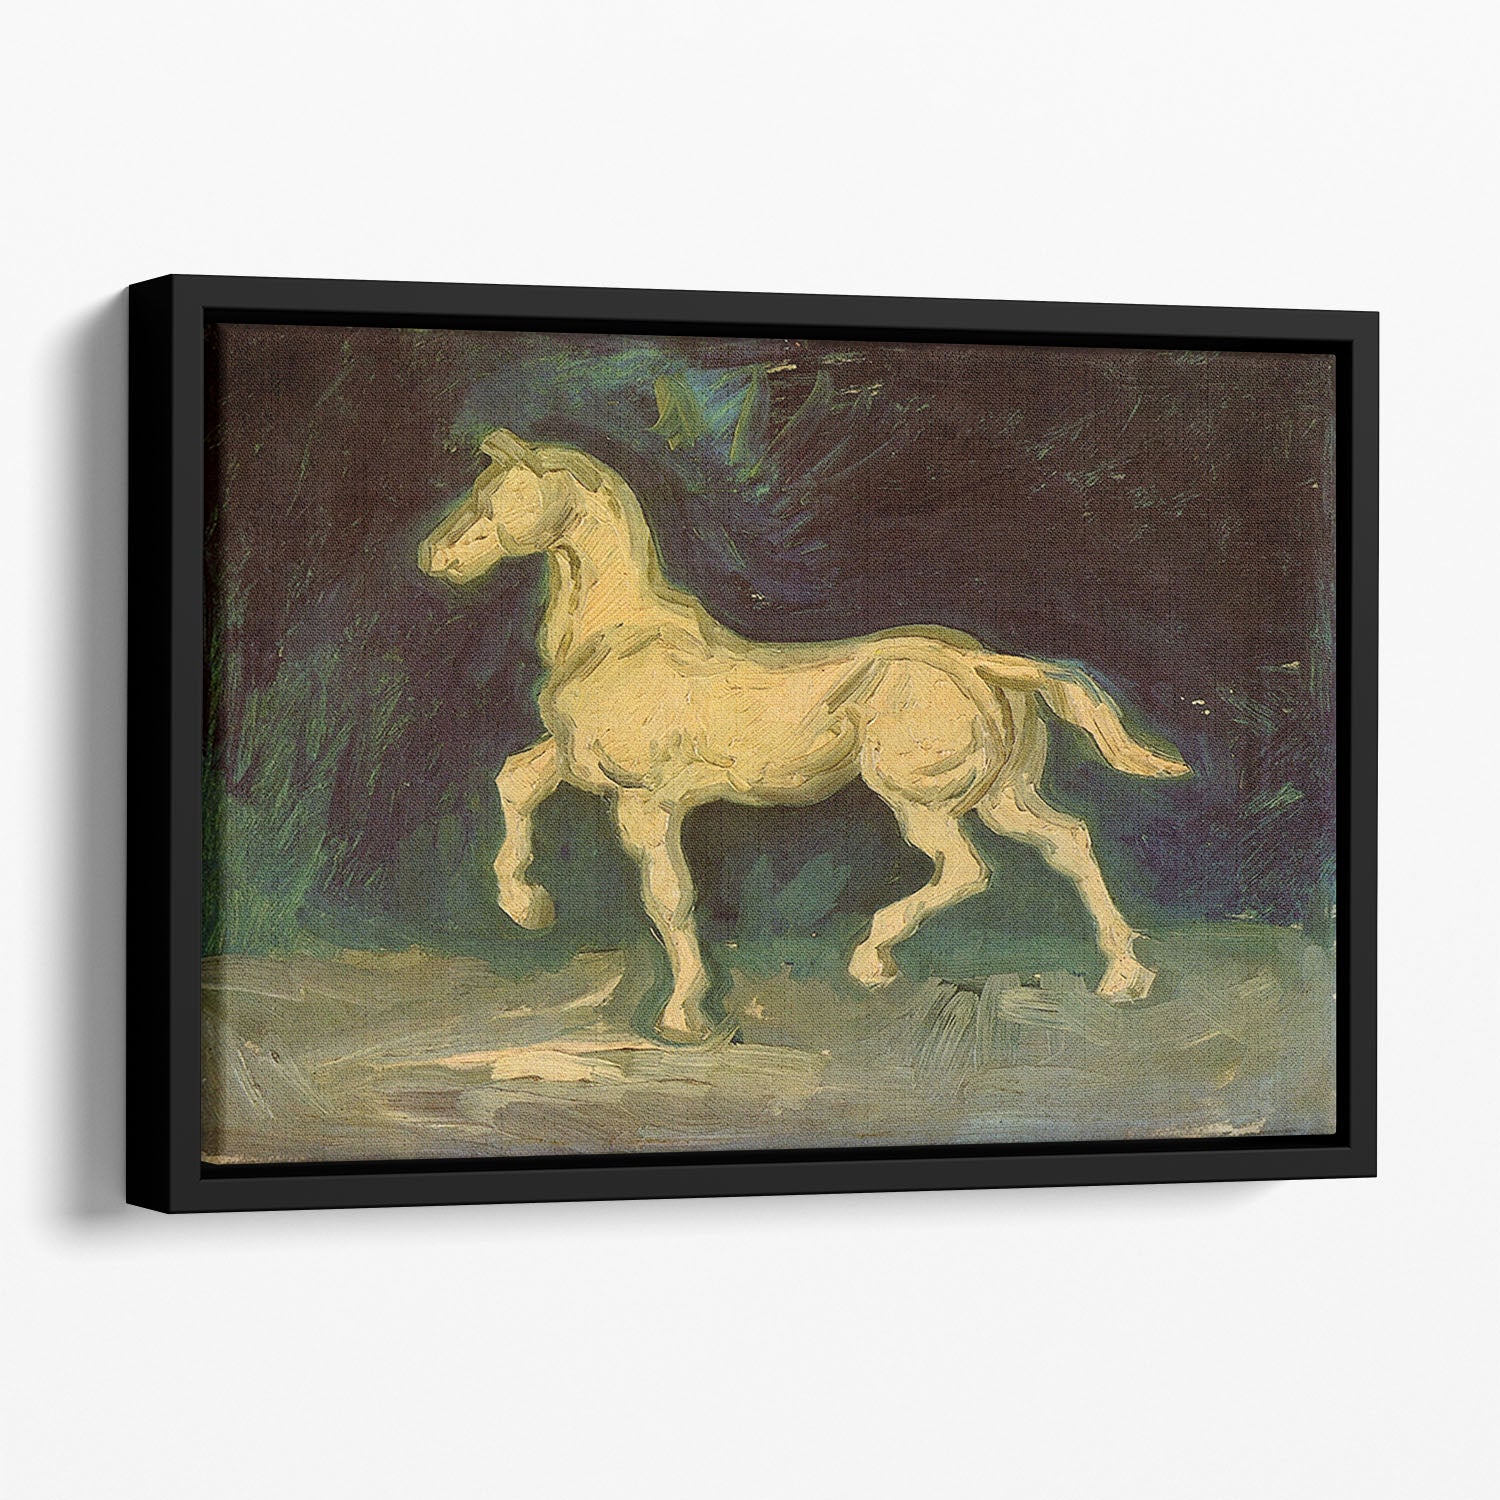 Plaster Statuette of a Horse by Van Gogh Floating Framed Canvas